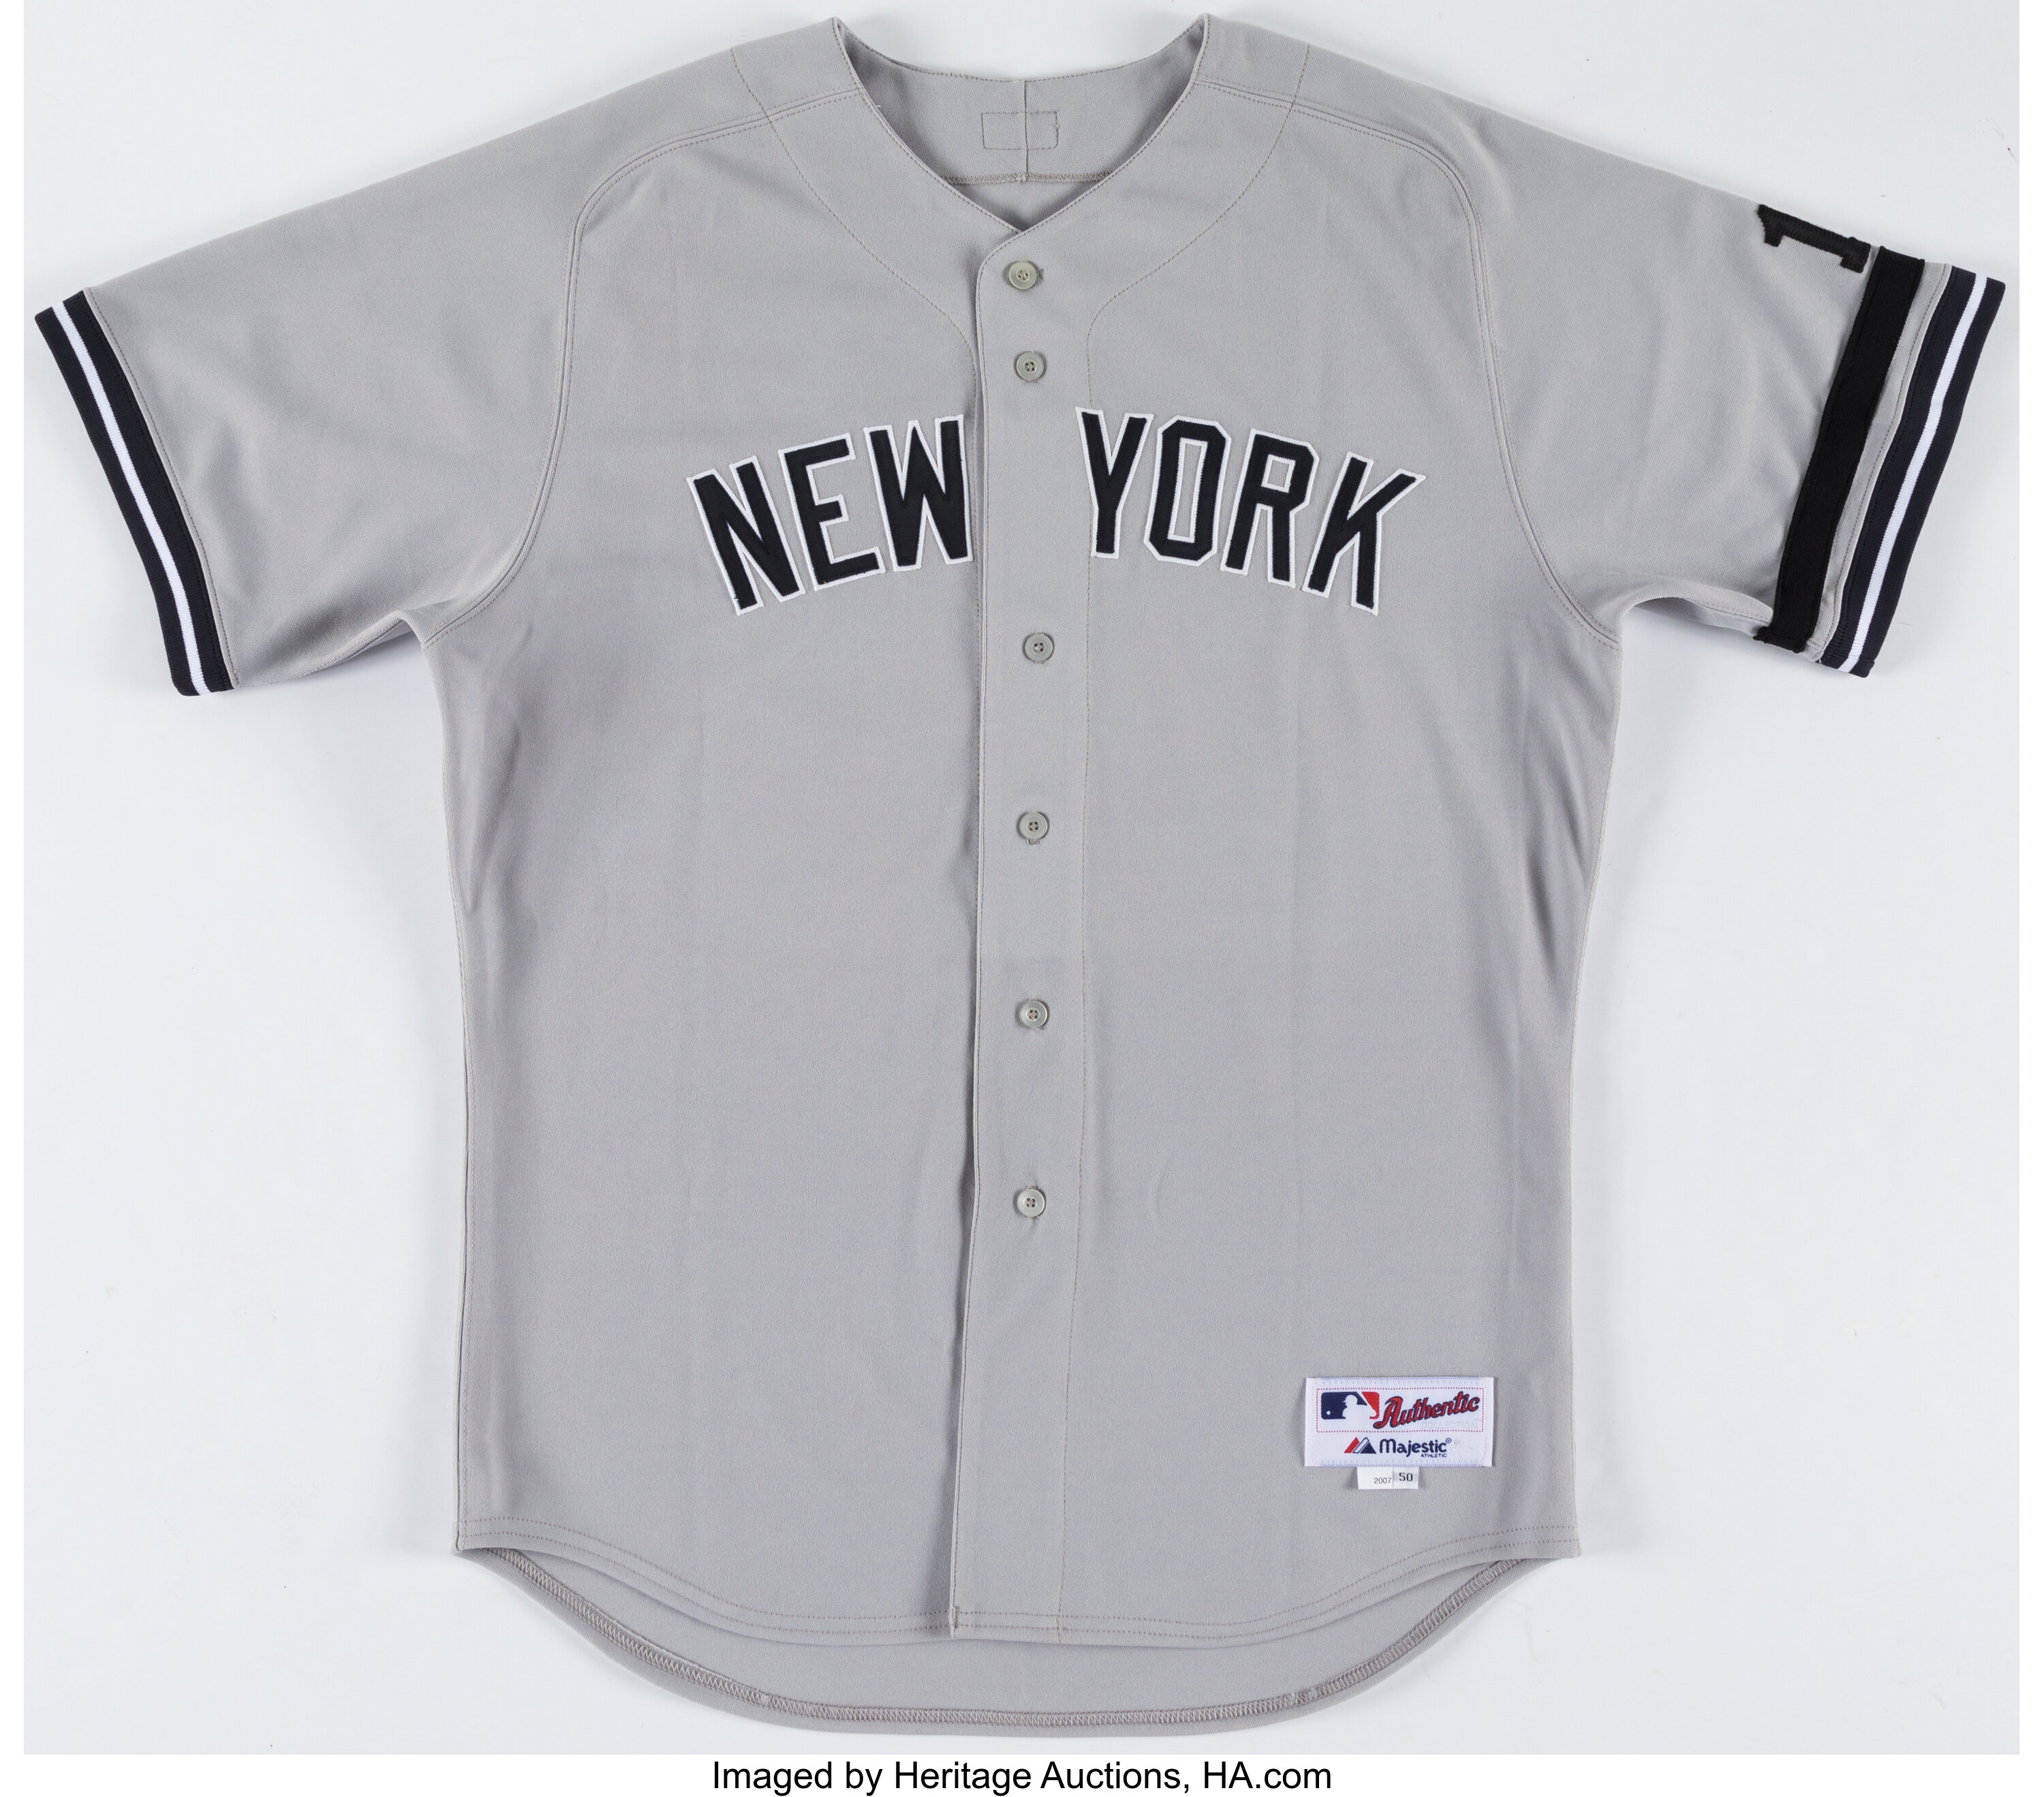 Andy Pettitte New York Yankees Autographed Authentic Home Jersey